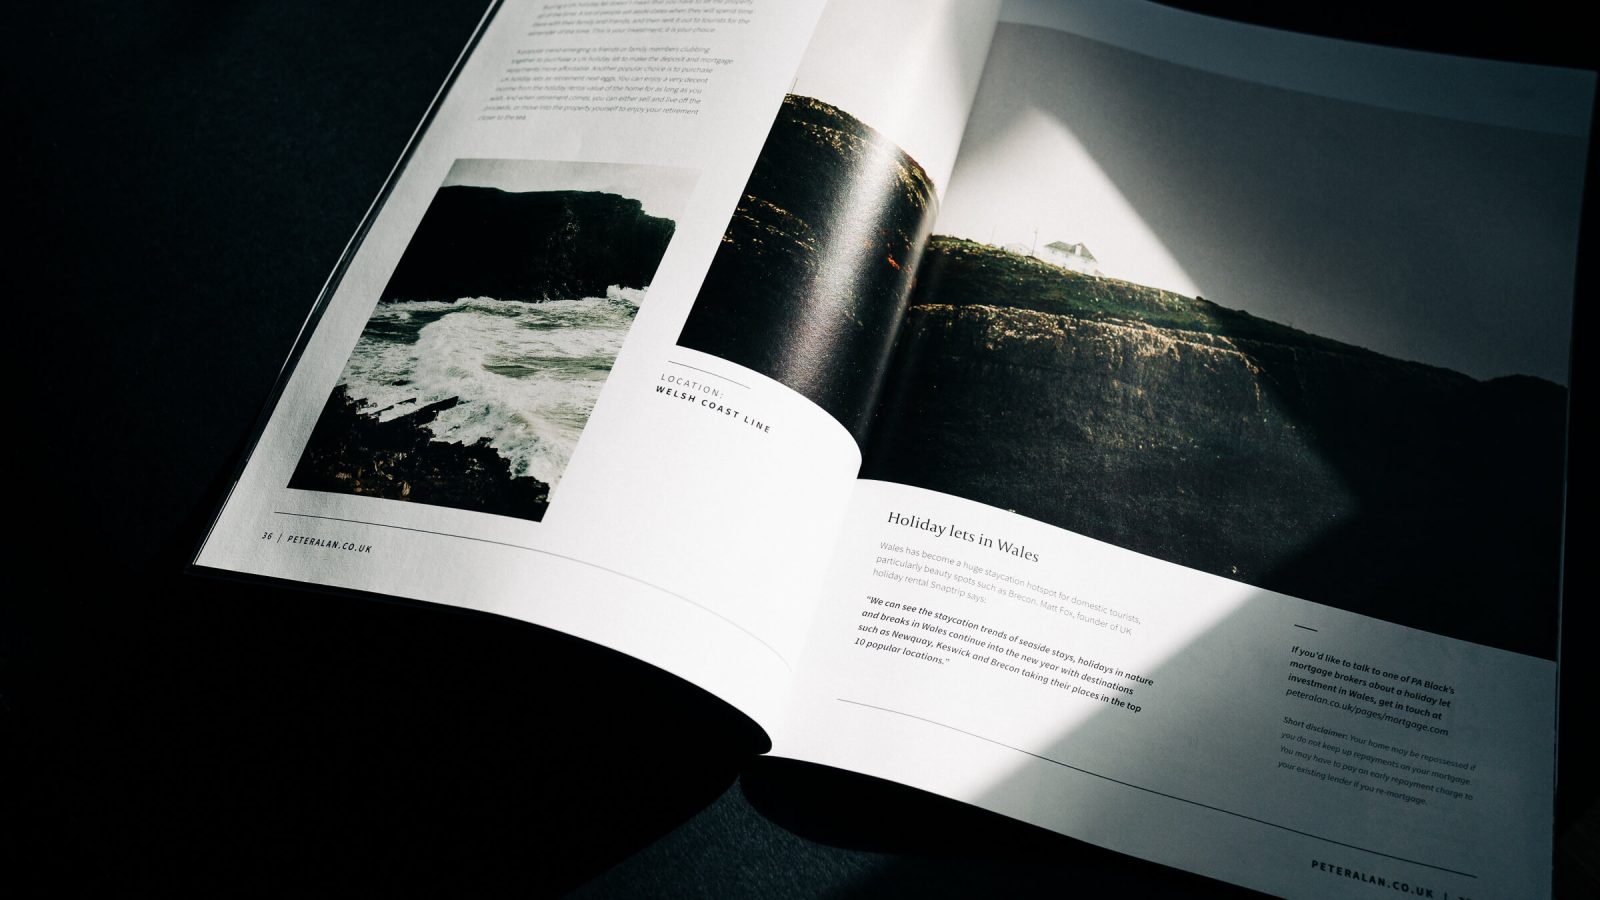 An open magazine featuring a landscape photograph across two pages, with the left displaying crashing waves and the right showing a sunlit rock face. Brand Agency UK captions are visible below the images.